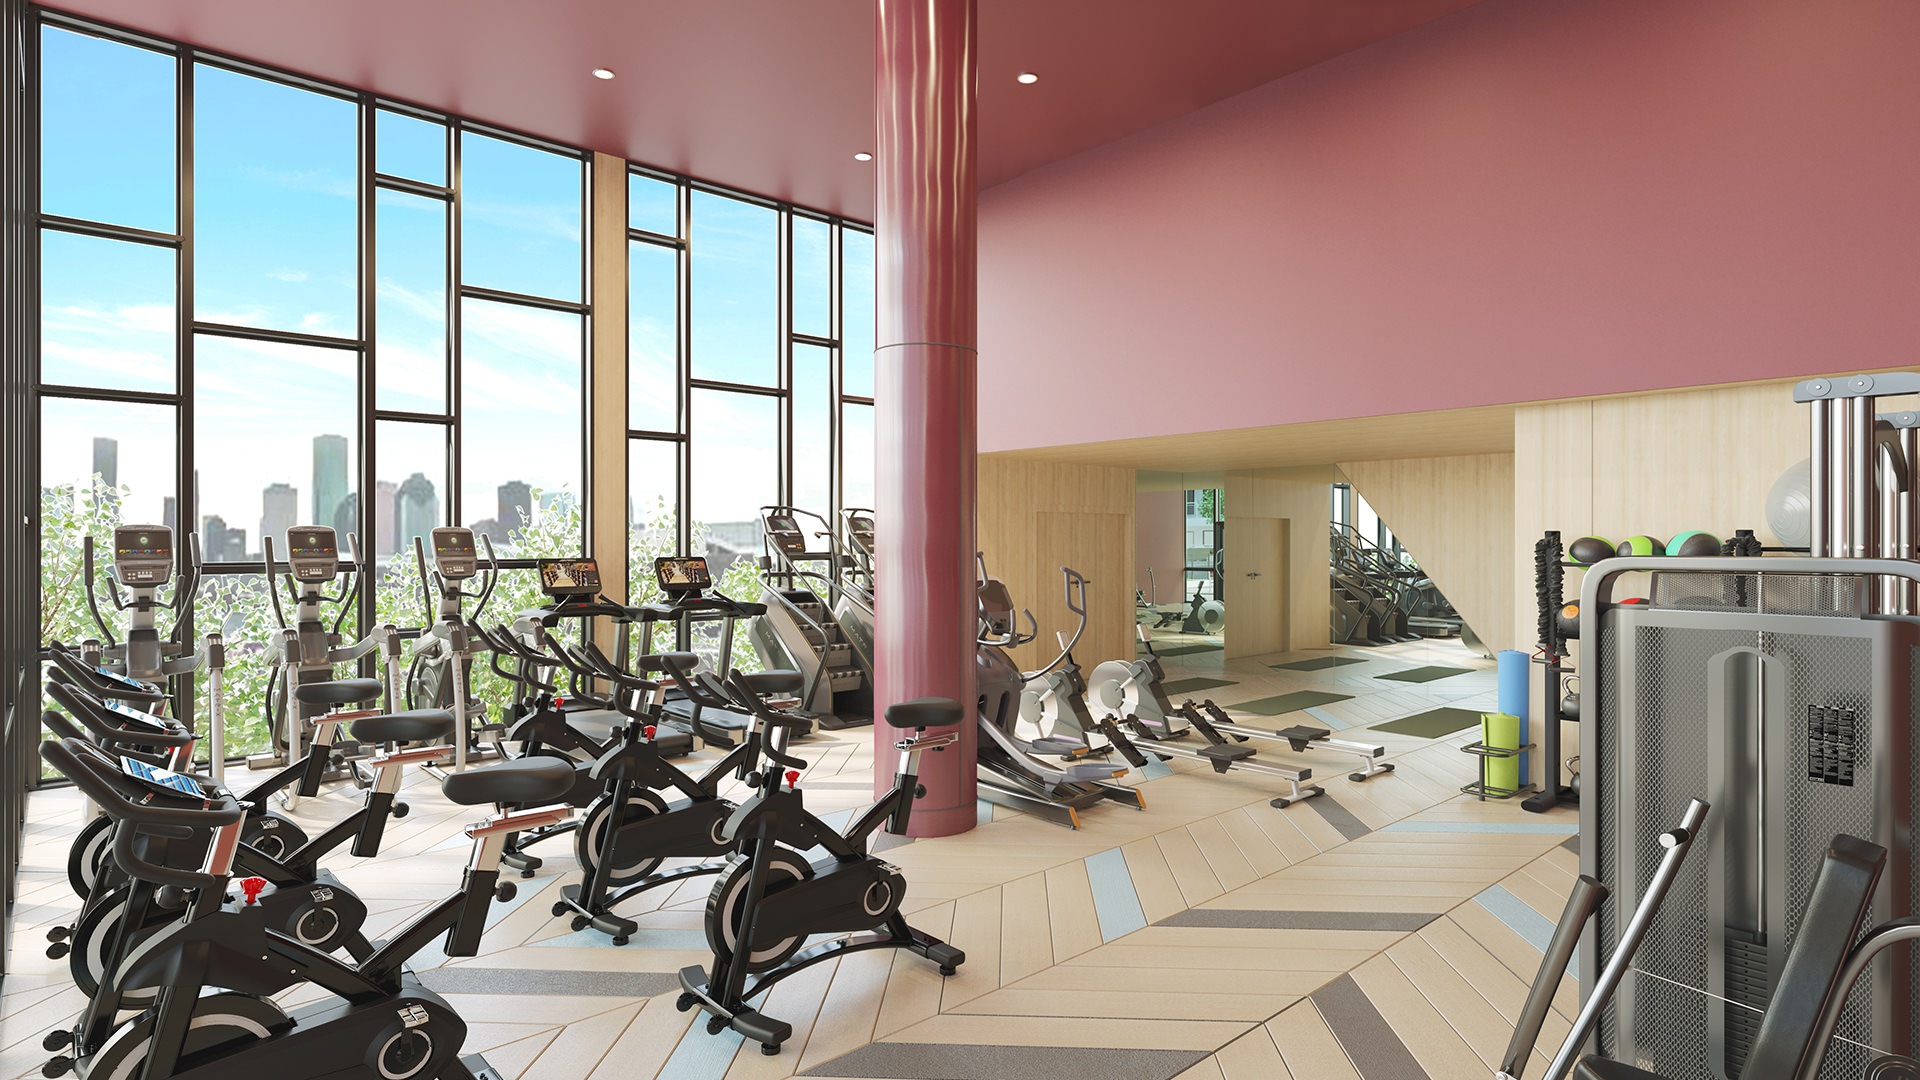 Large fitness center with wood floors and plenty of equipment